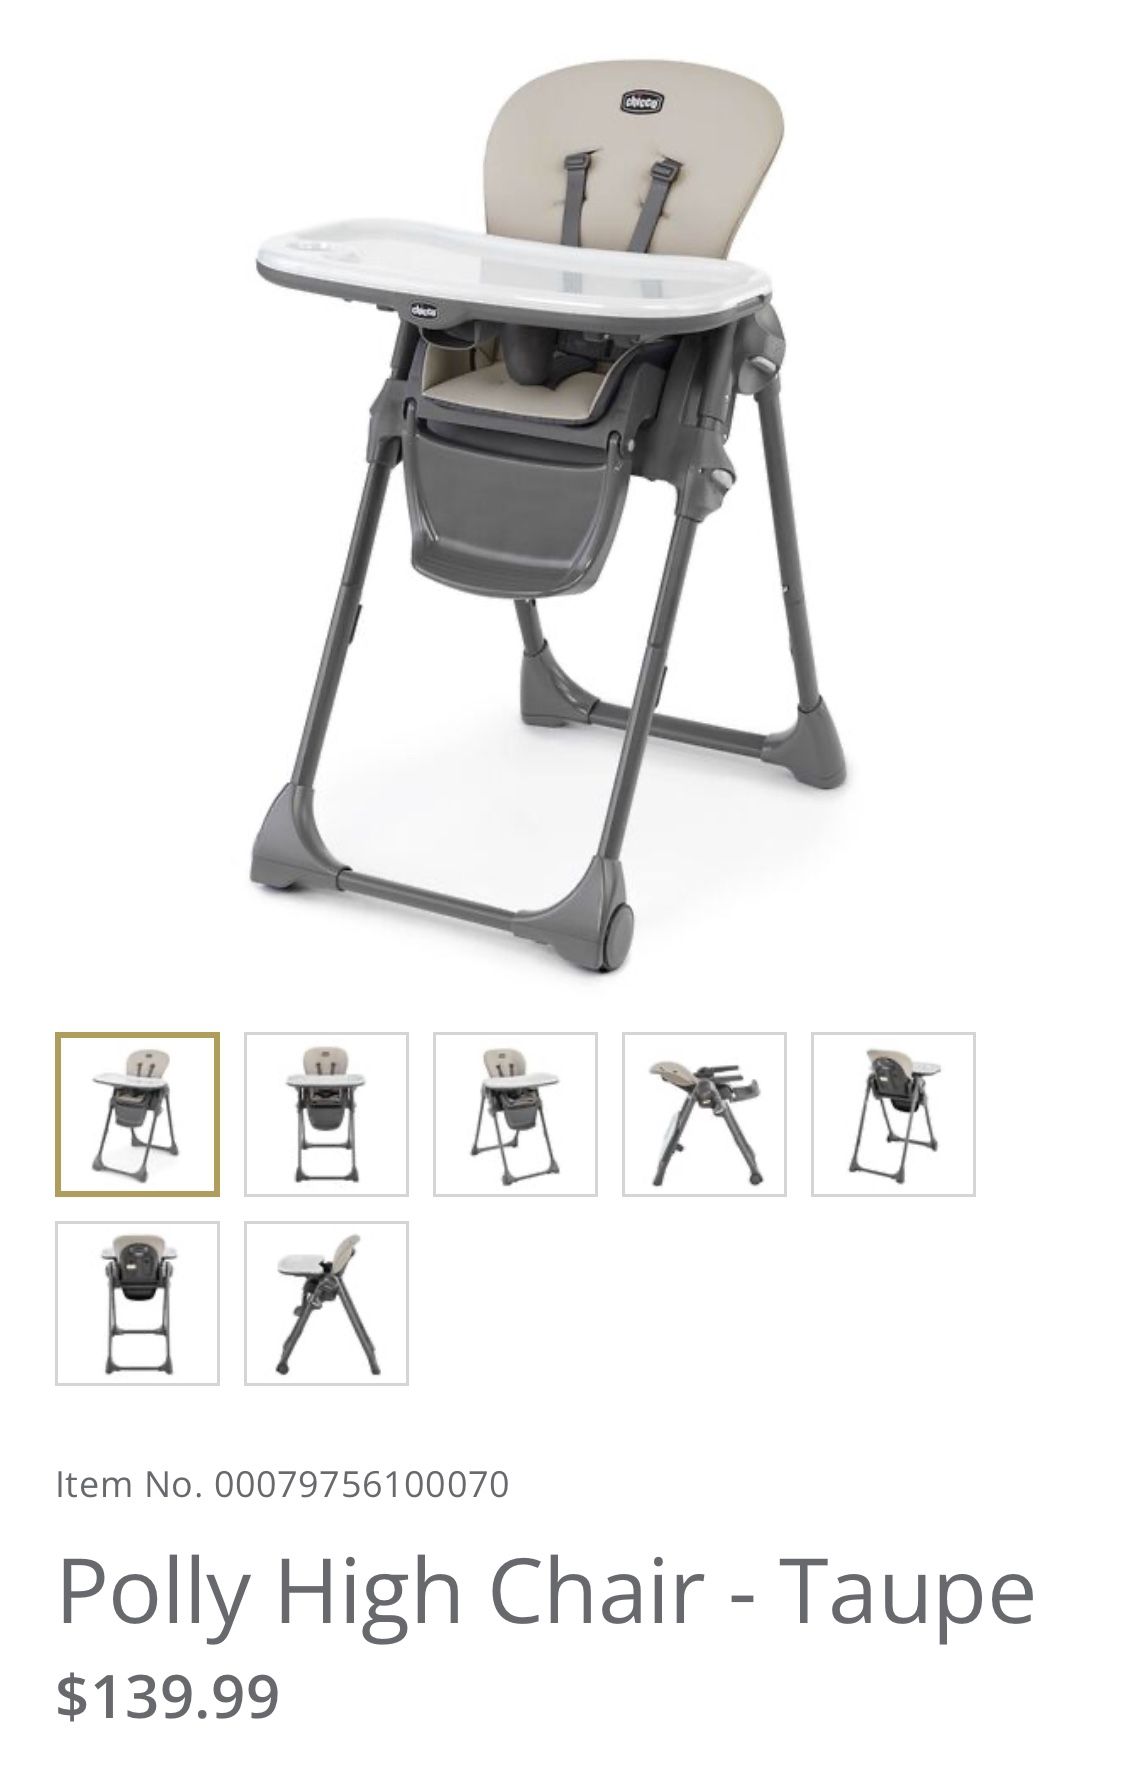 Chico Polly Compact High Chair